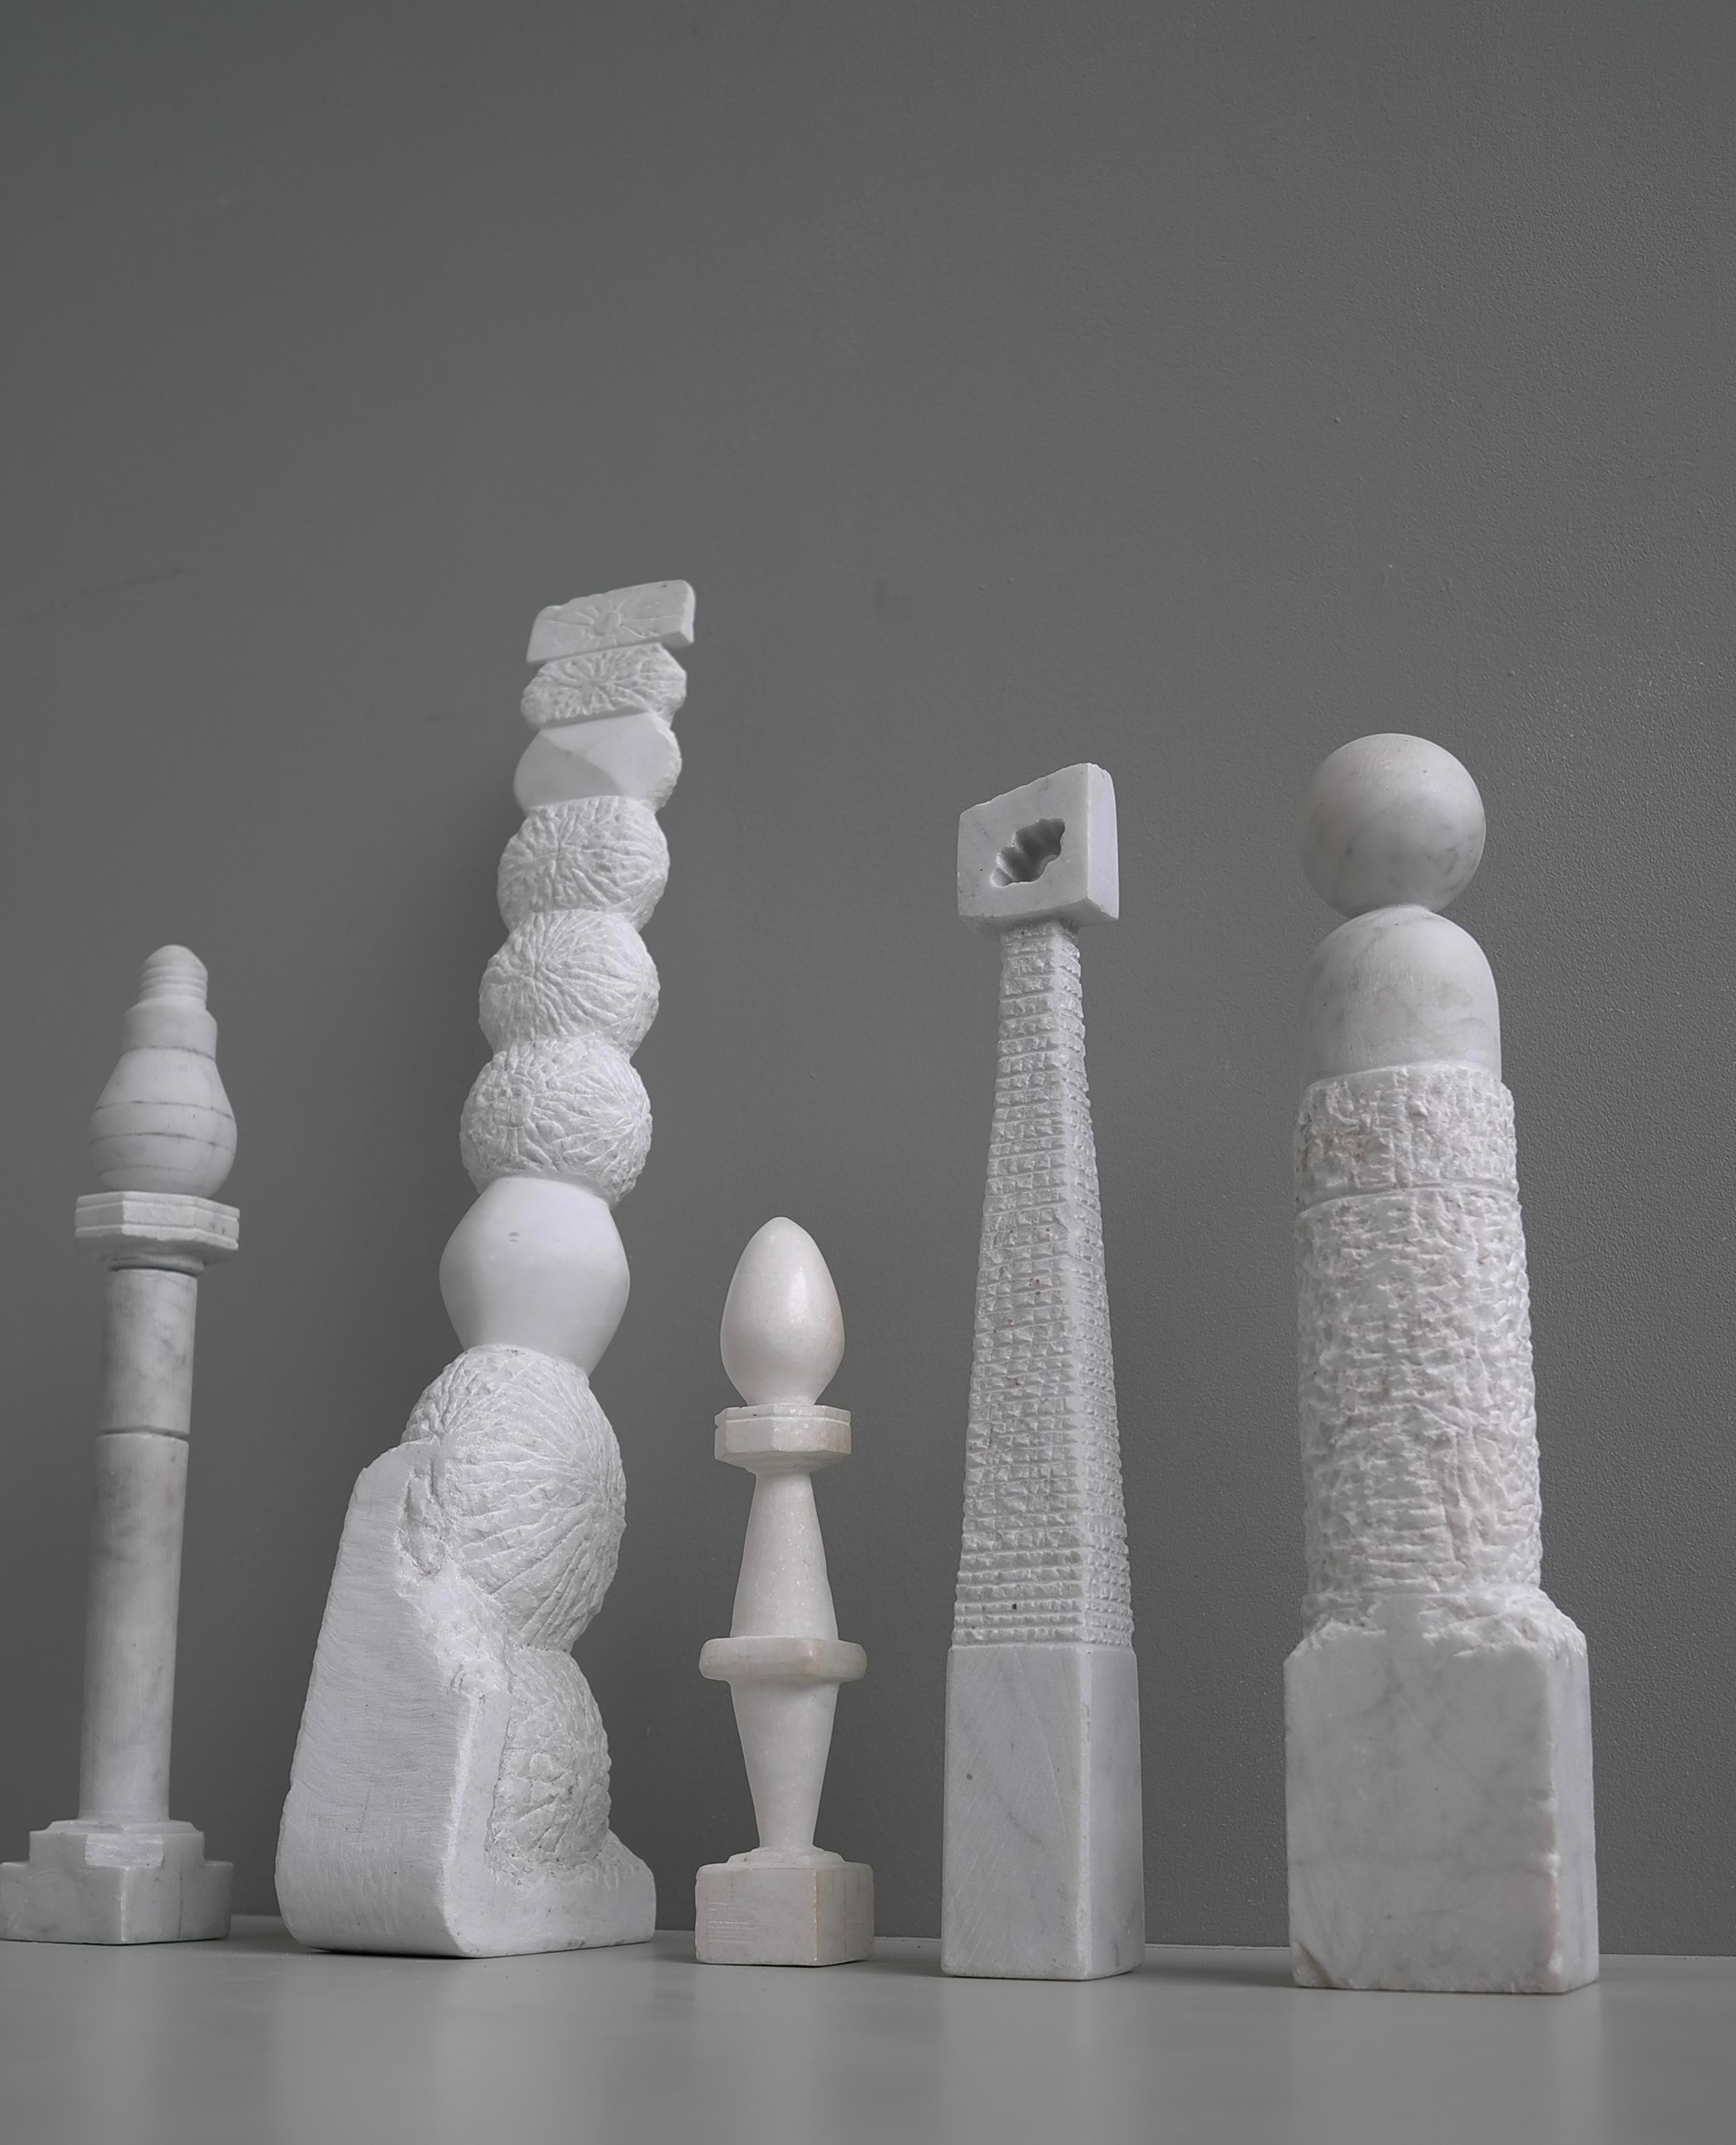 Selection of Decorative Abstract Marble Menhir Column Art Sculptures, circa 1970 by Gerrit Patist.

Sizes: Largest 57cm 
41 / 40 / 40 / smallest 26 cm

Gerrit Patist Visual Artist who received his training at the Artibus Academy and Center for